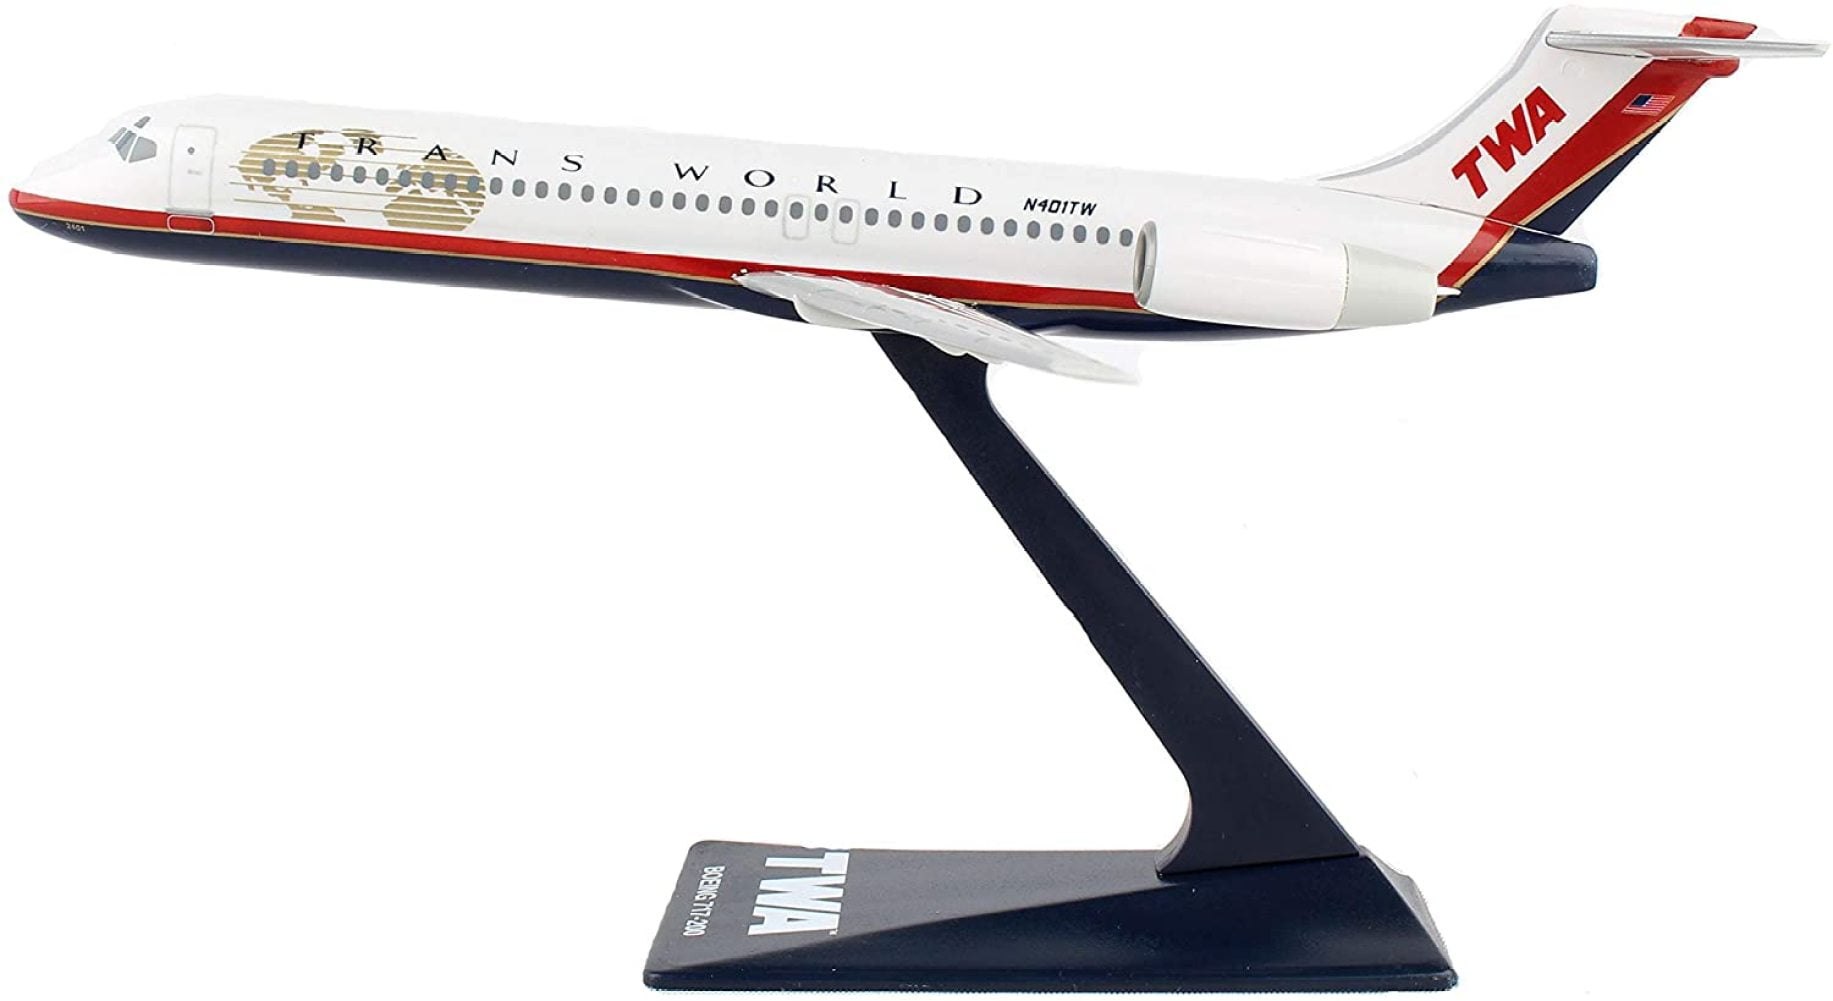 Flight Miniatures McDonnell Douglas Demo House Livery MD-80 1:200 Scale Display Model with Stand 